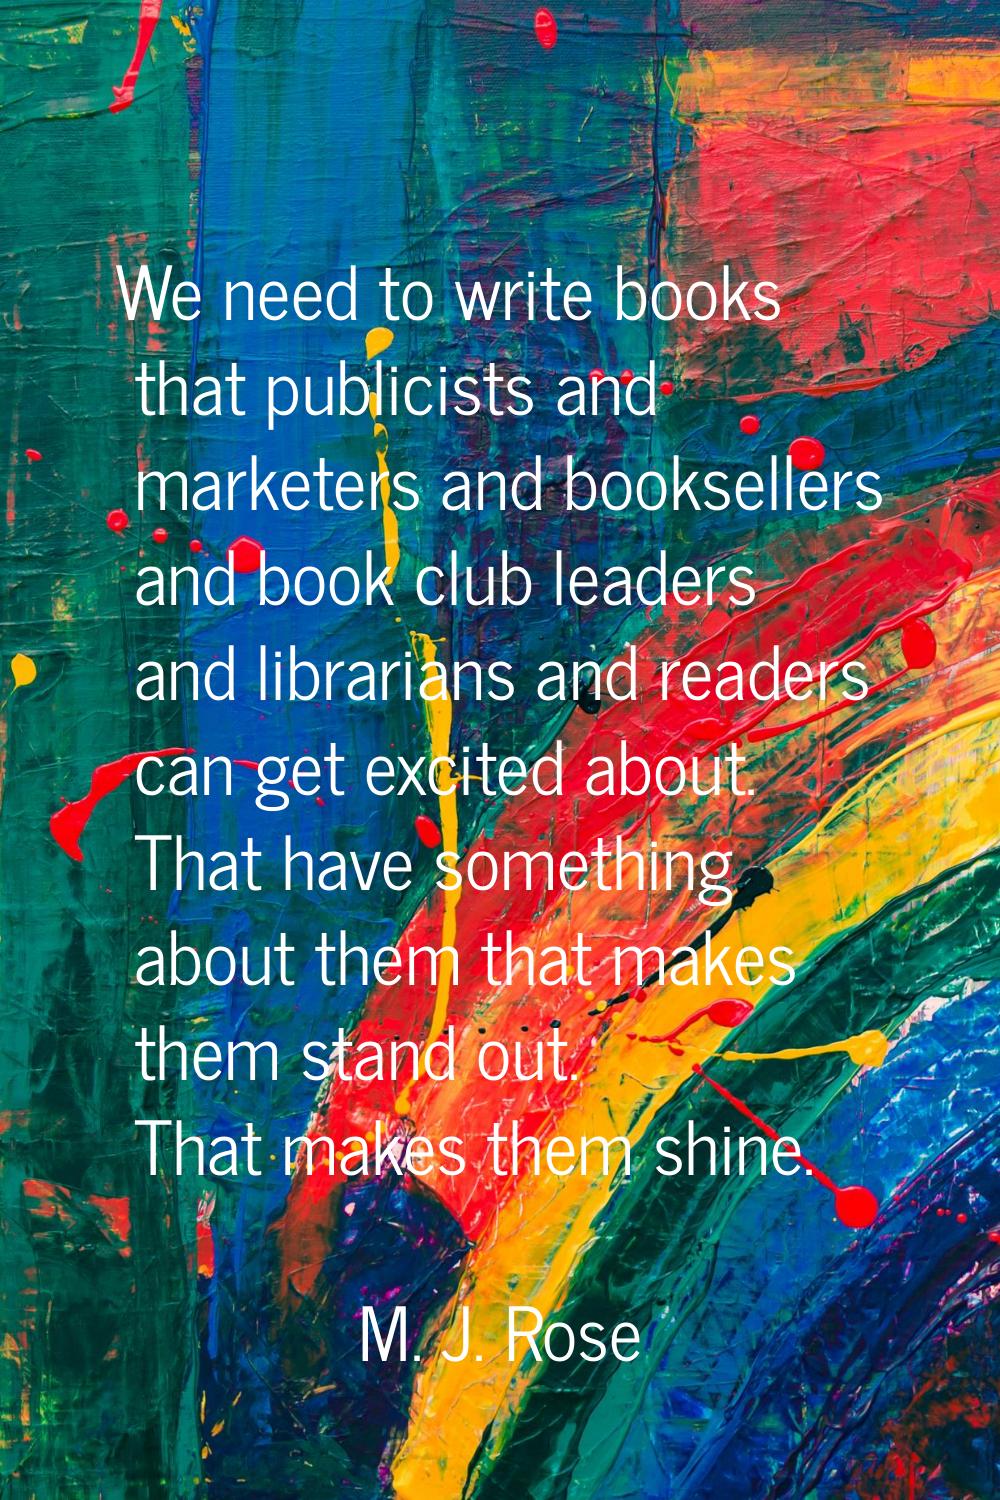 We need to write books that publicists and marketers and booksellers and book club leaders and libr